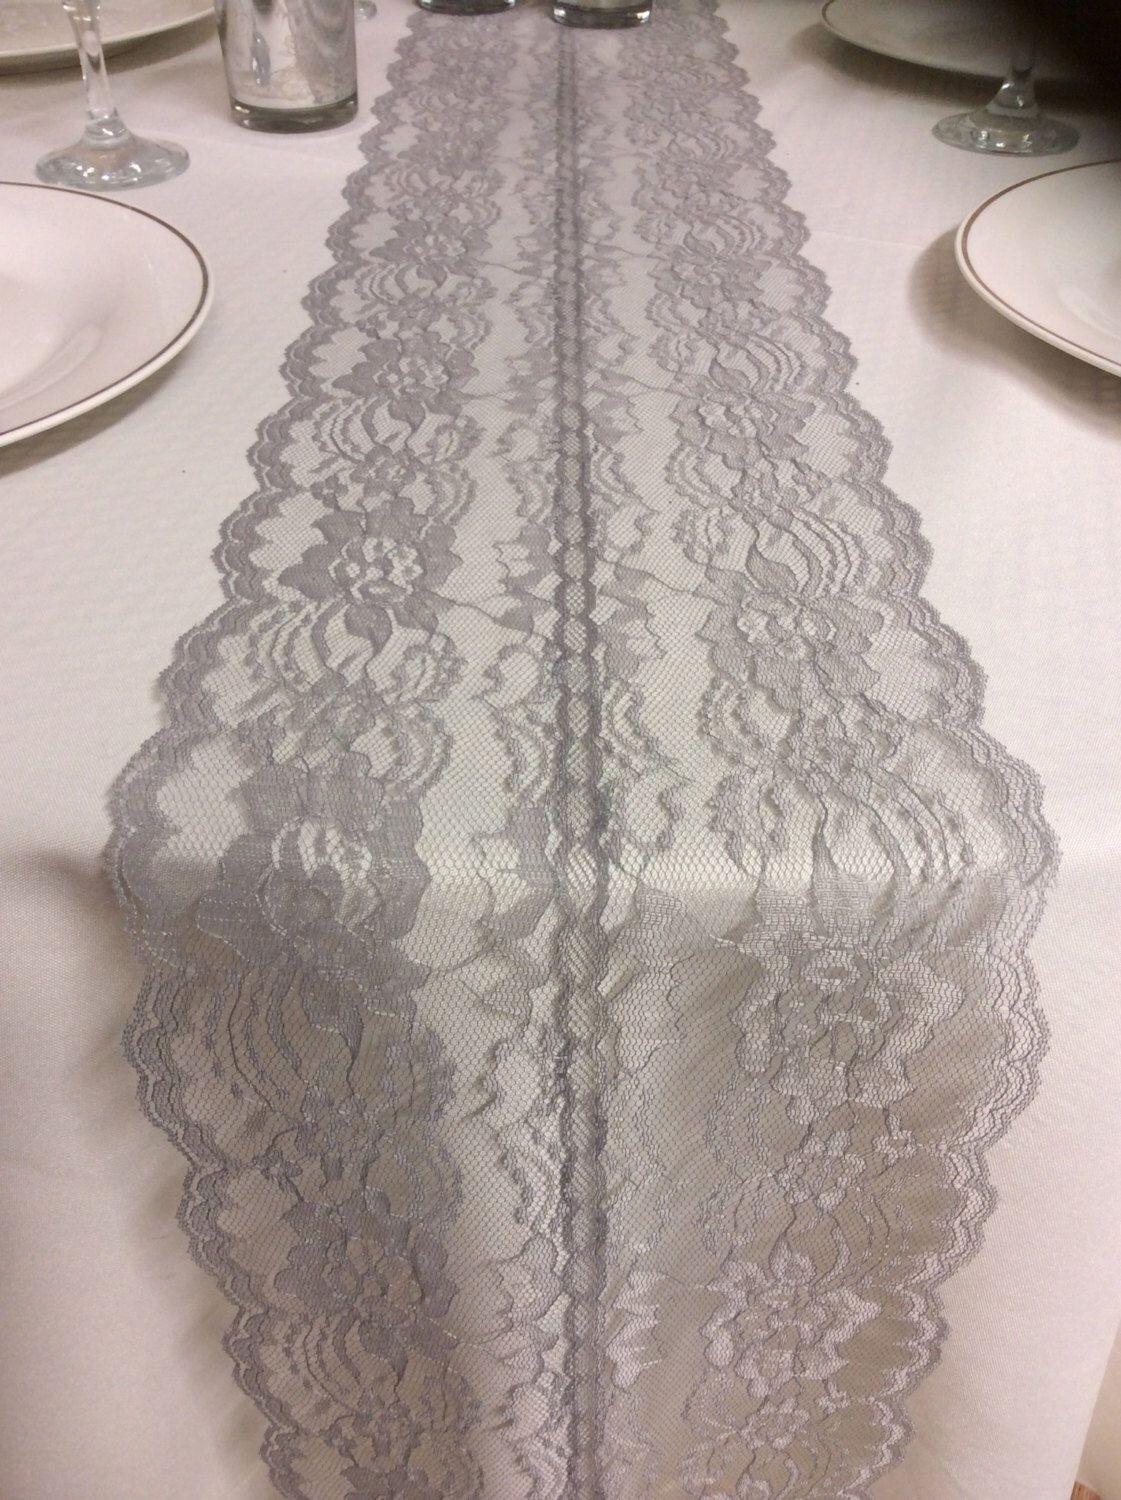 6ft grey lace table runner wedding